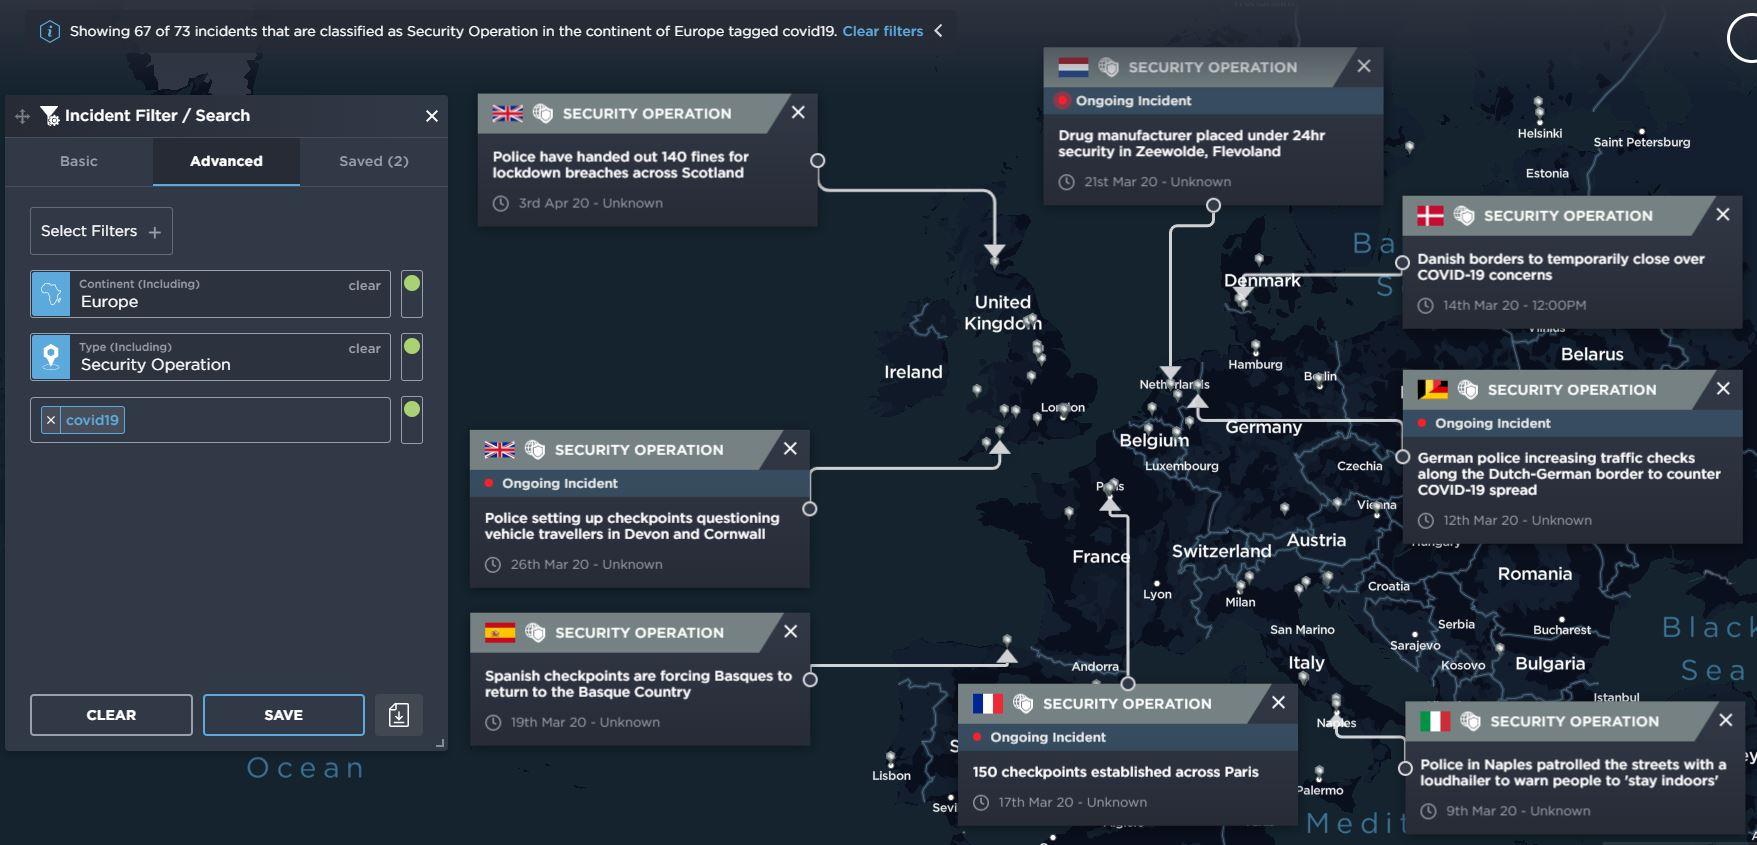 COVID-19 related security operations that have occurred across Europe since the outbreak began. 